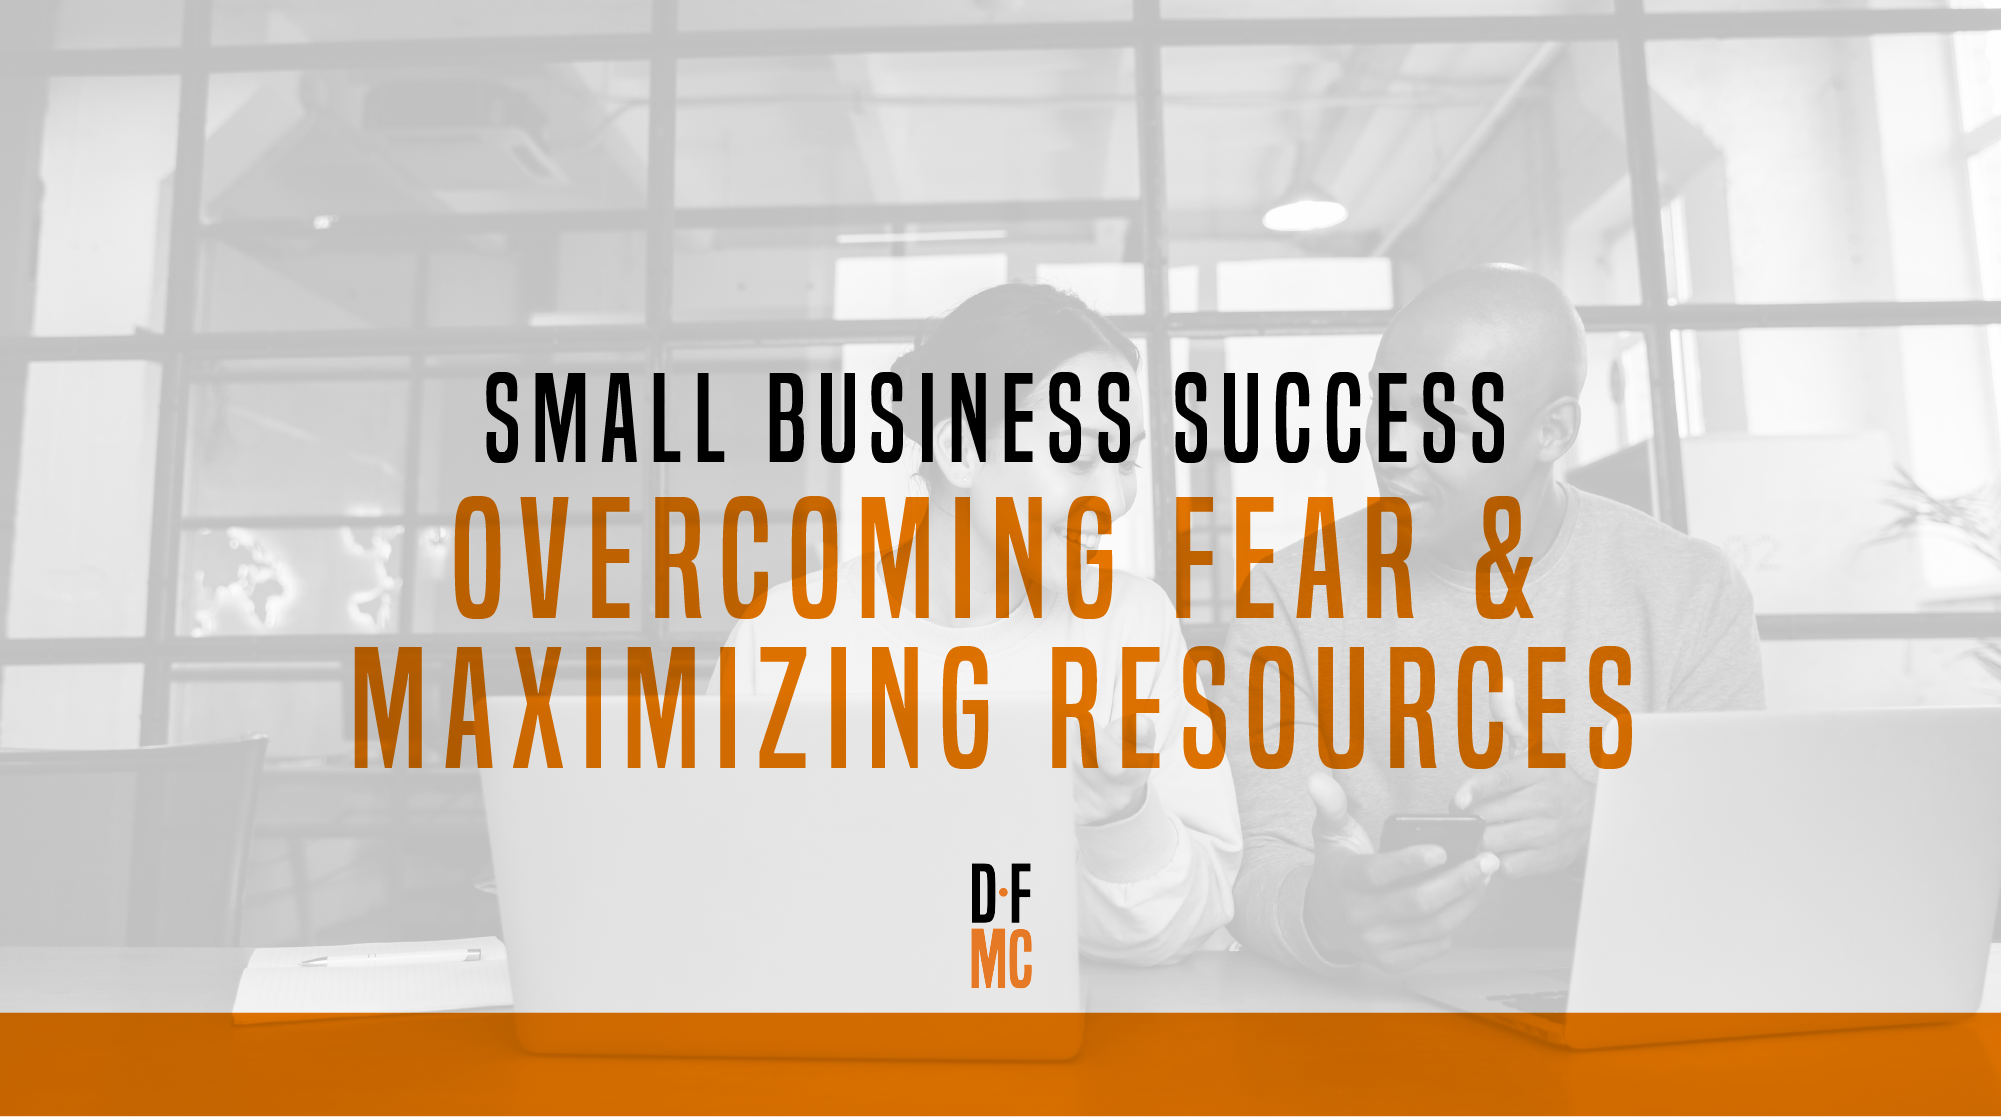 Small business success. Maximizing Resources.